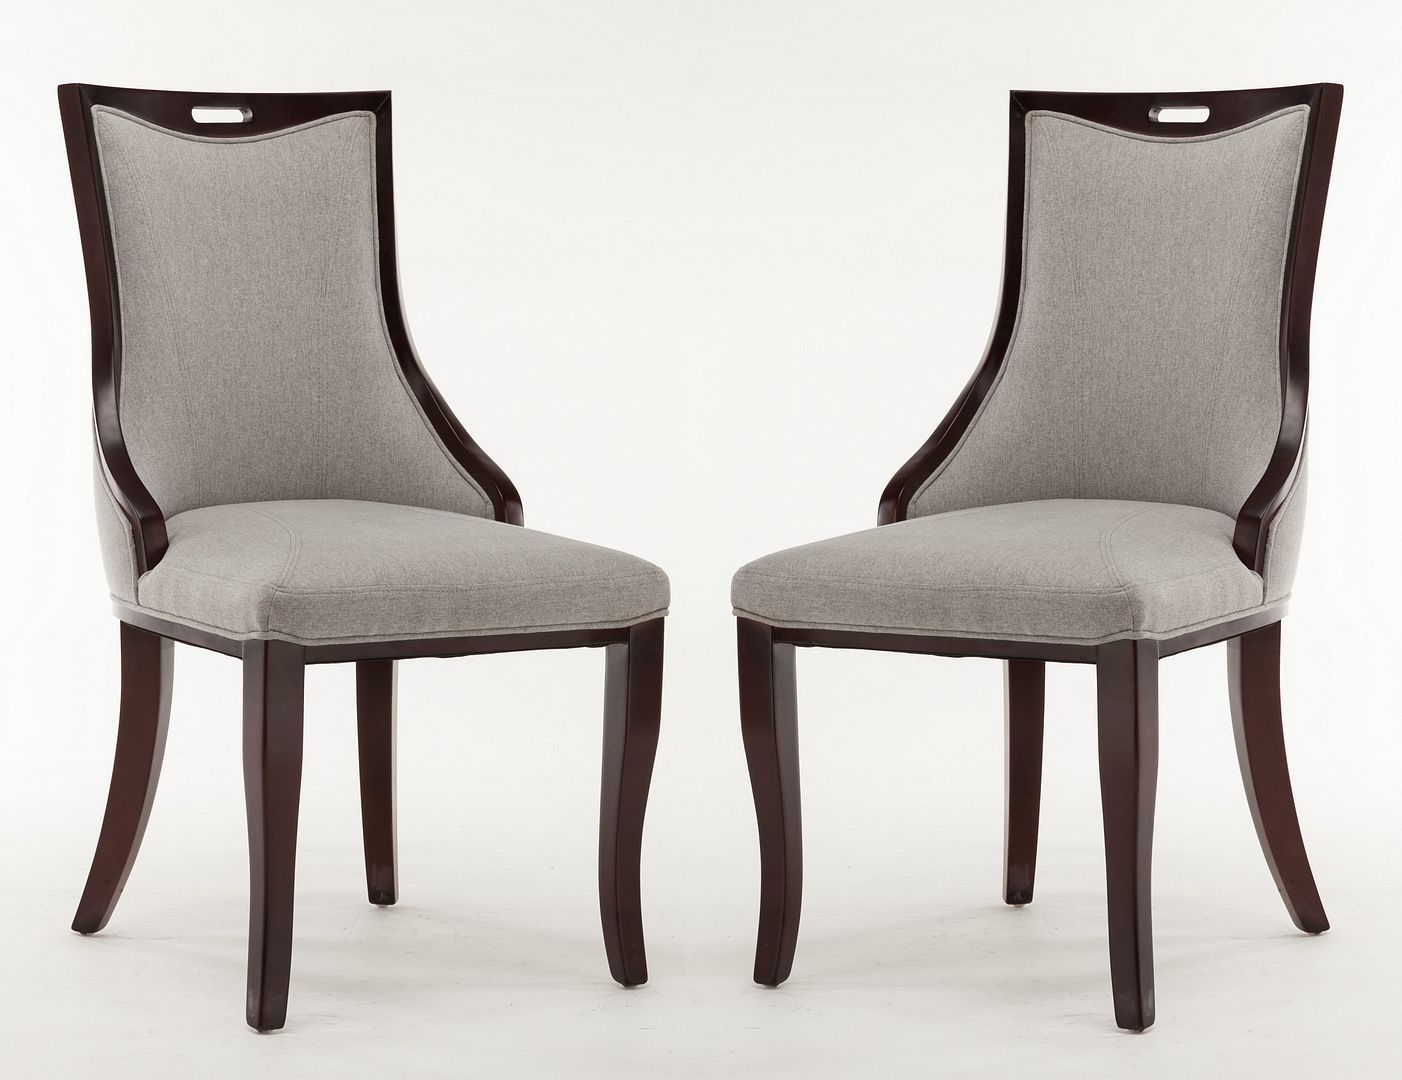 Emperor Twill Fabric Dining Chair - Set of 2 - East Shore Modern Home Furnishings